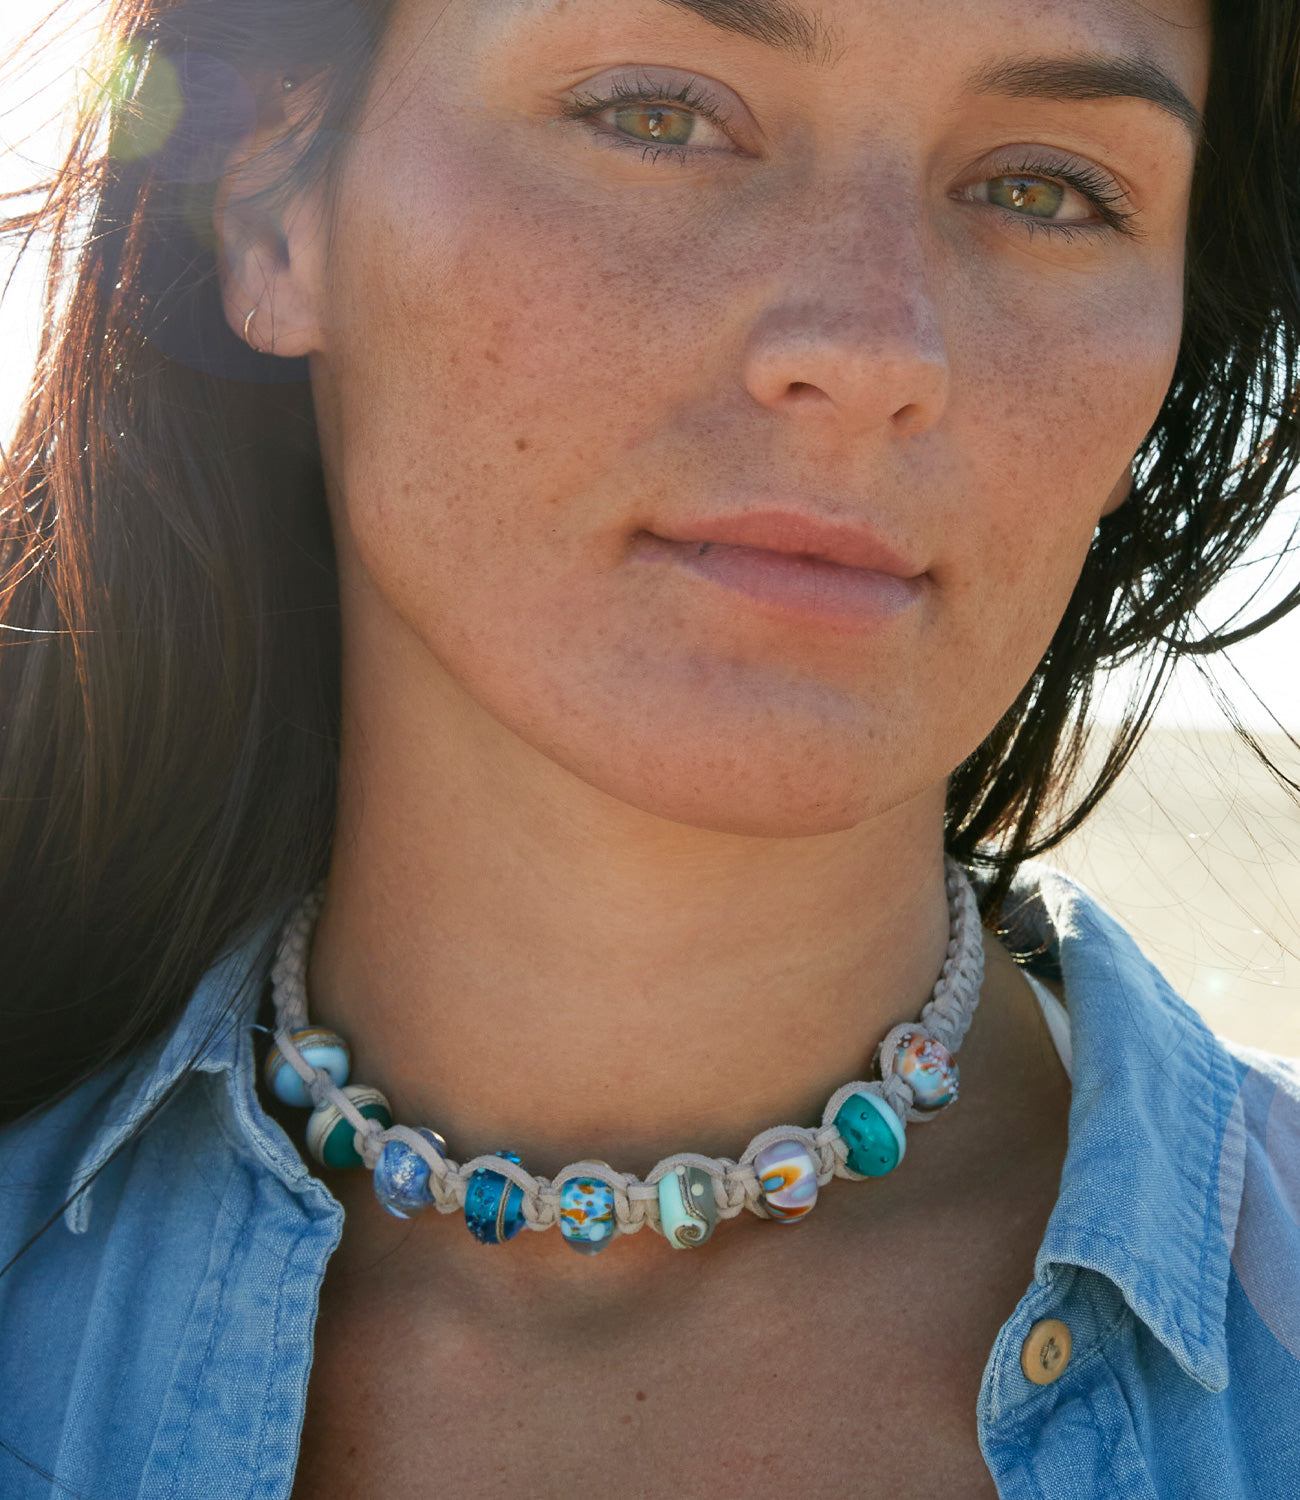 Colourful glass bead choker necklace worn by girl on the beach.